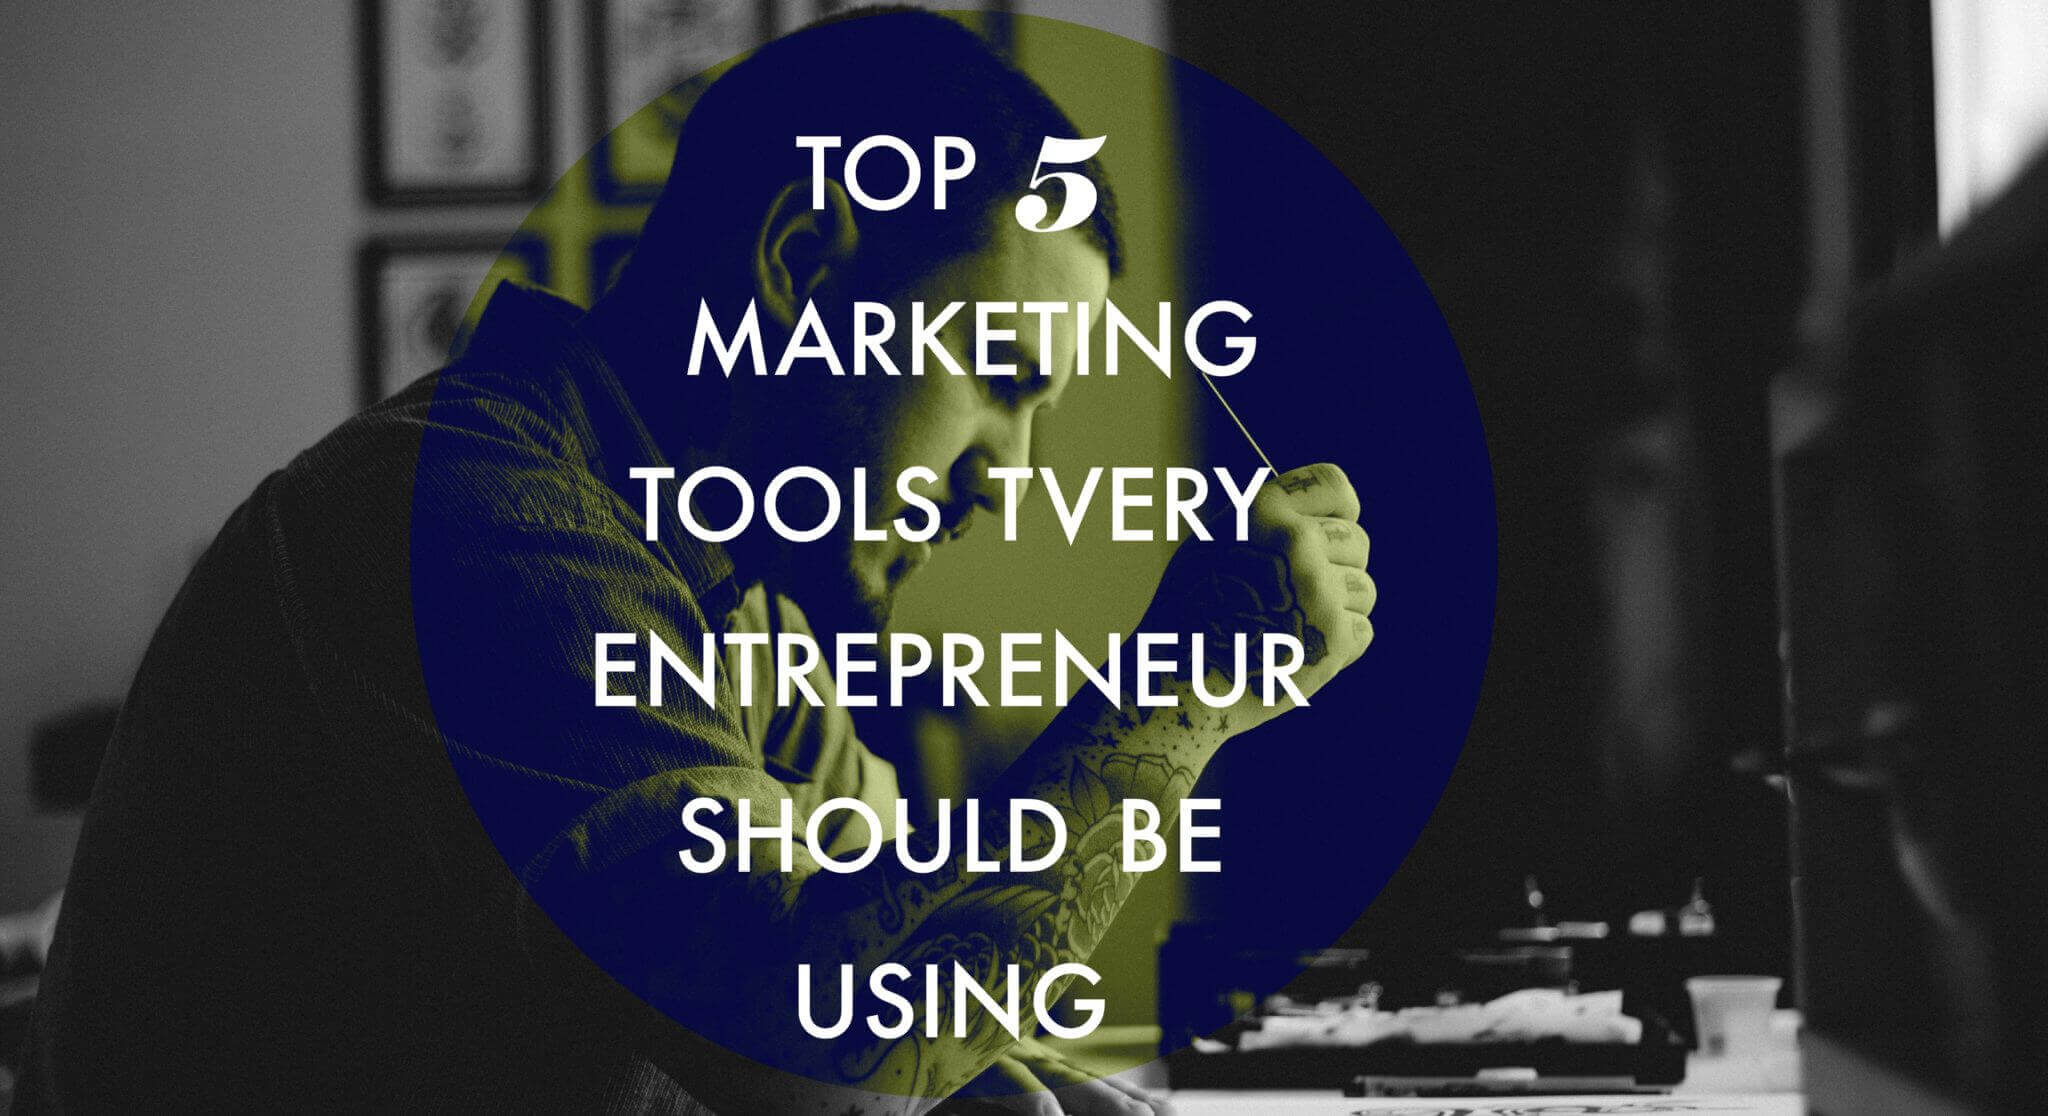 Top 5 Marketing Tools Every Entrepreneur Should Be Using